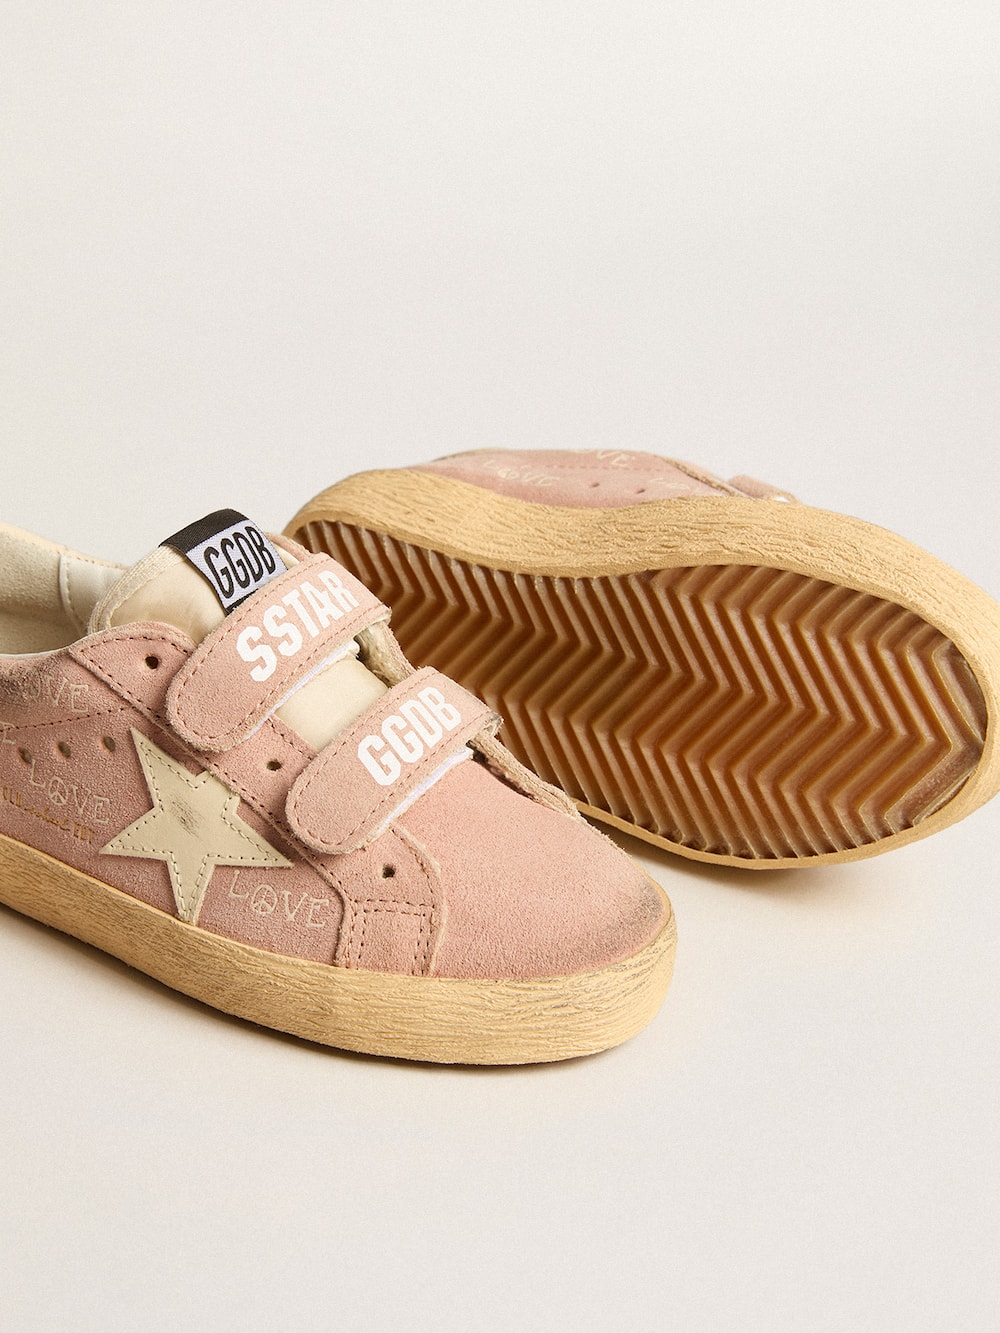 Golden Goose - Old School Junior in pink suede with cream leather star and heel tab in 